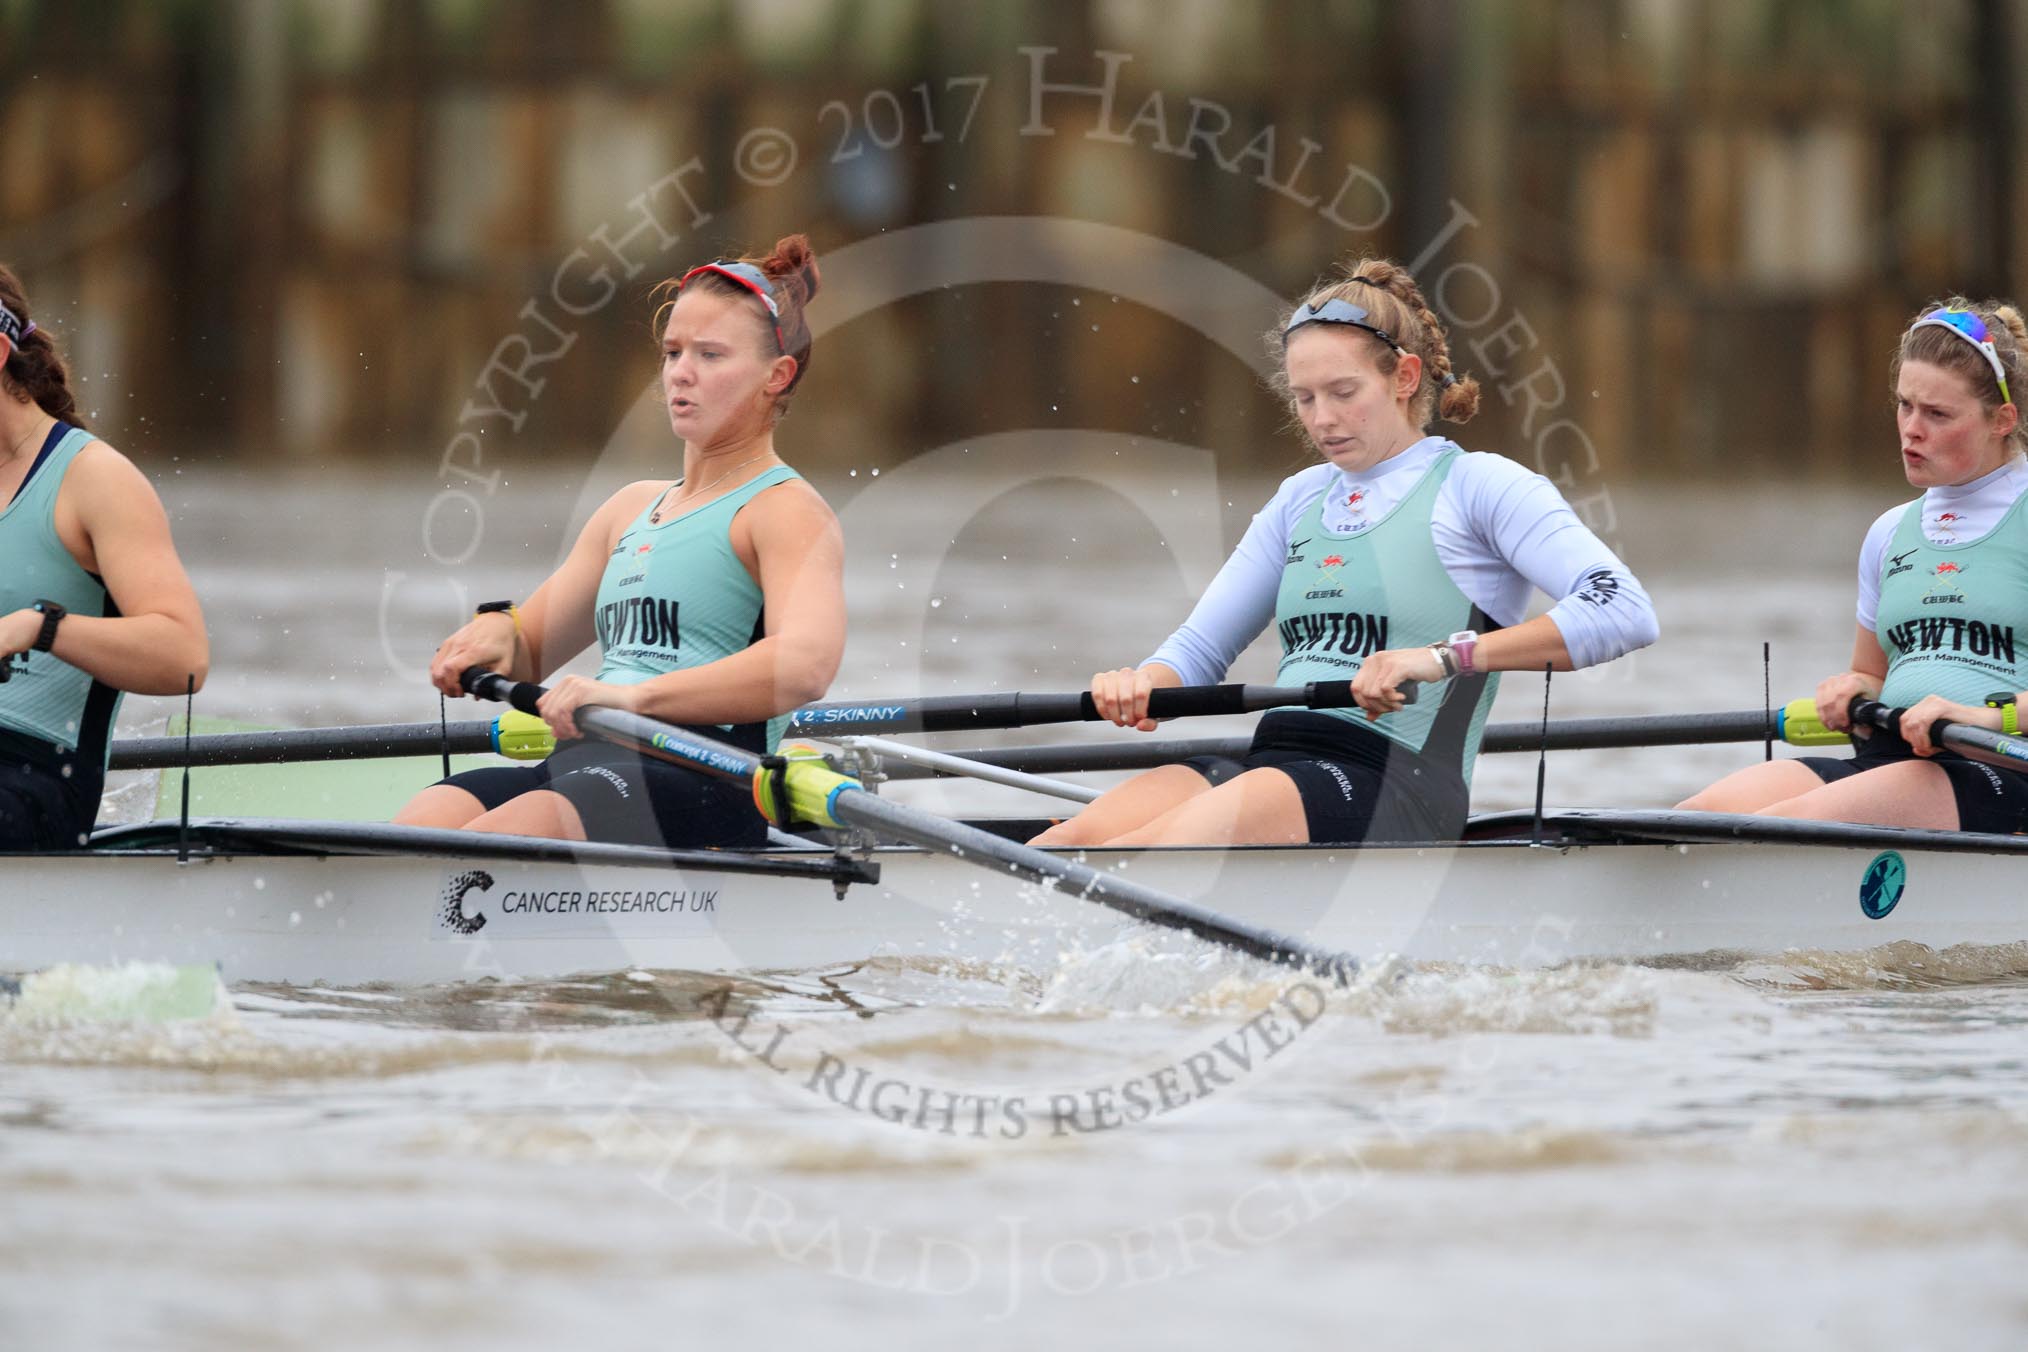 The Boat Race season 2018 - Women's Boat Race Trial Eights (CUWBC, Cambridge): Expecto Patronum after the start of the race, here 6 Thea Zabell, 5 Kelsey Barolak, 4 Laura Foster, 3 Sally O Brien.
River Thames between Putney Bridge and Mortlake,
London SW15,

United Kingdom,
on 05 December 2017 at 12:43, image #57